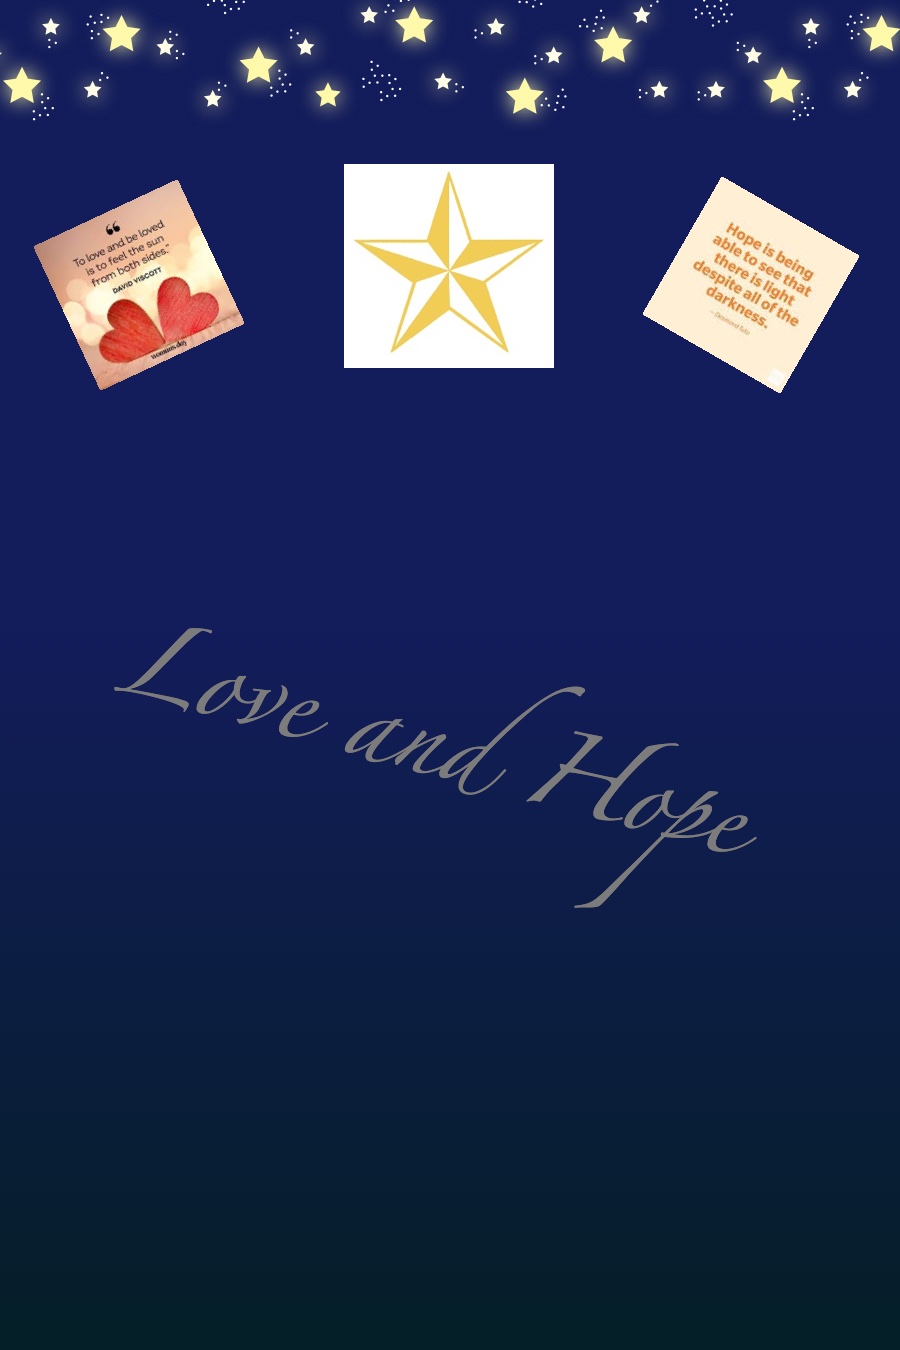 Love and Hope by Charlotte K